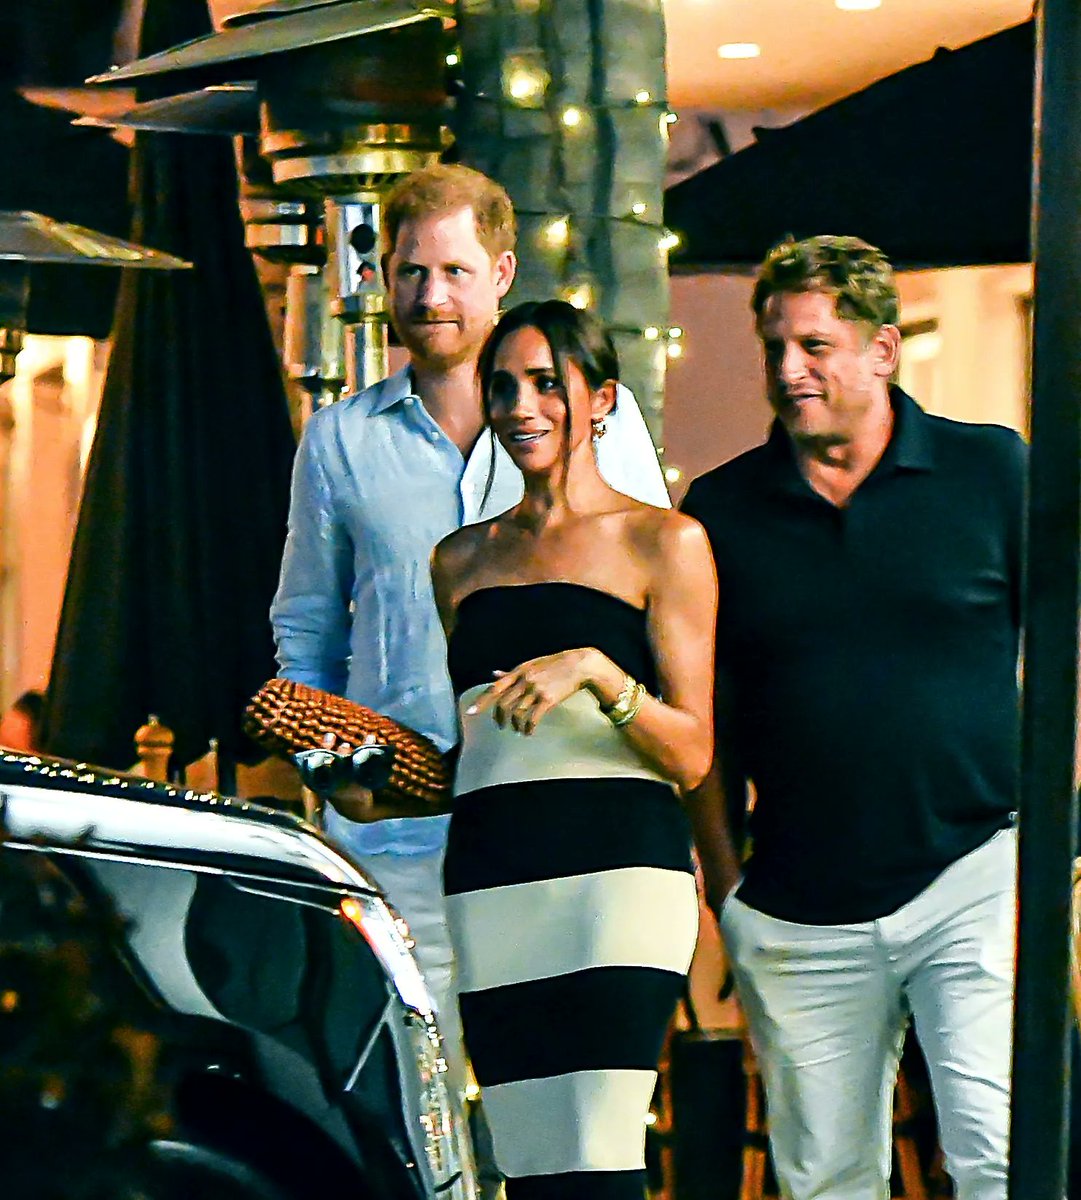 Classy Crown Princess Victoria👌
While 'push in front' Megain a former D-List Cable TV actress, turns up at a trendy Restaurant in Monticieto wearing a beach dress & sandals 🫣 Harry few steps behind
Why can't TW just get herself a stylist
#meghanmarkle46 #MeghanMarkleHasNoTalent